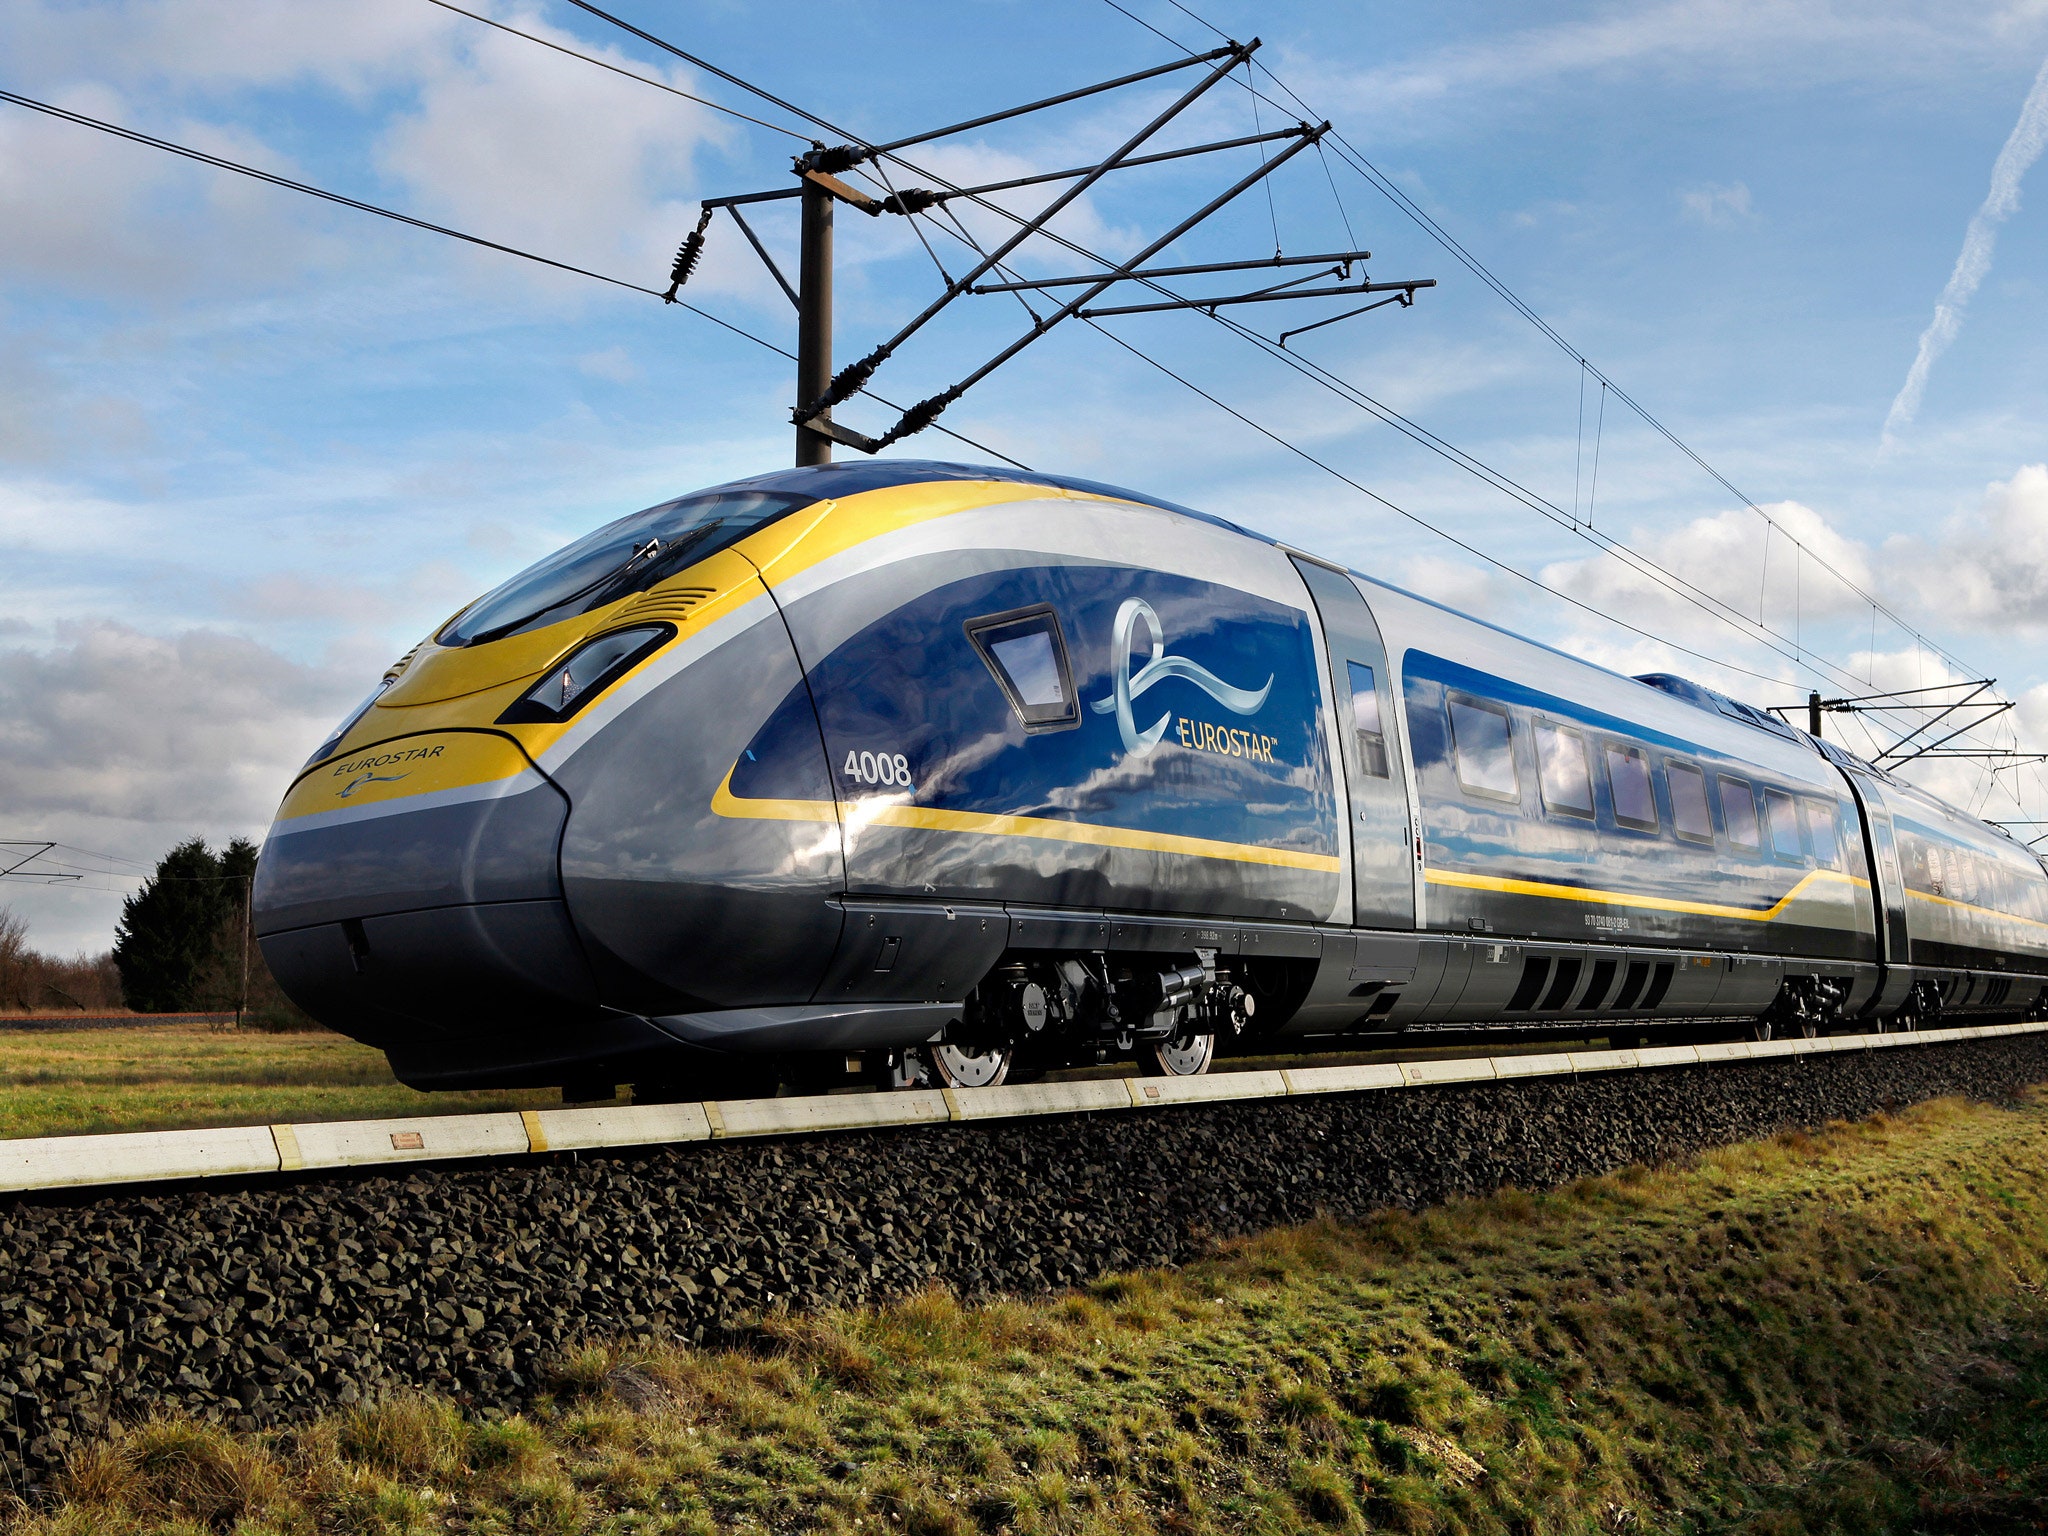 The 10 Fastest Trains in the World. Condé Nast Traveler